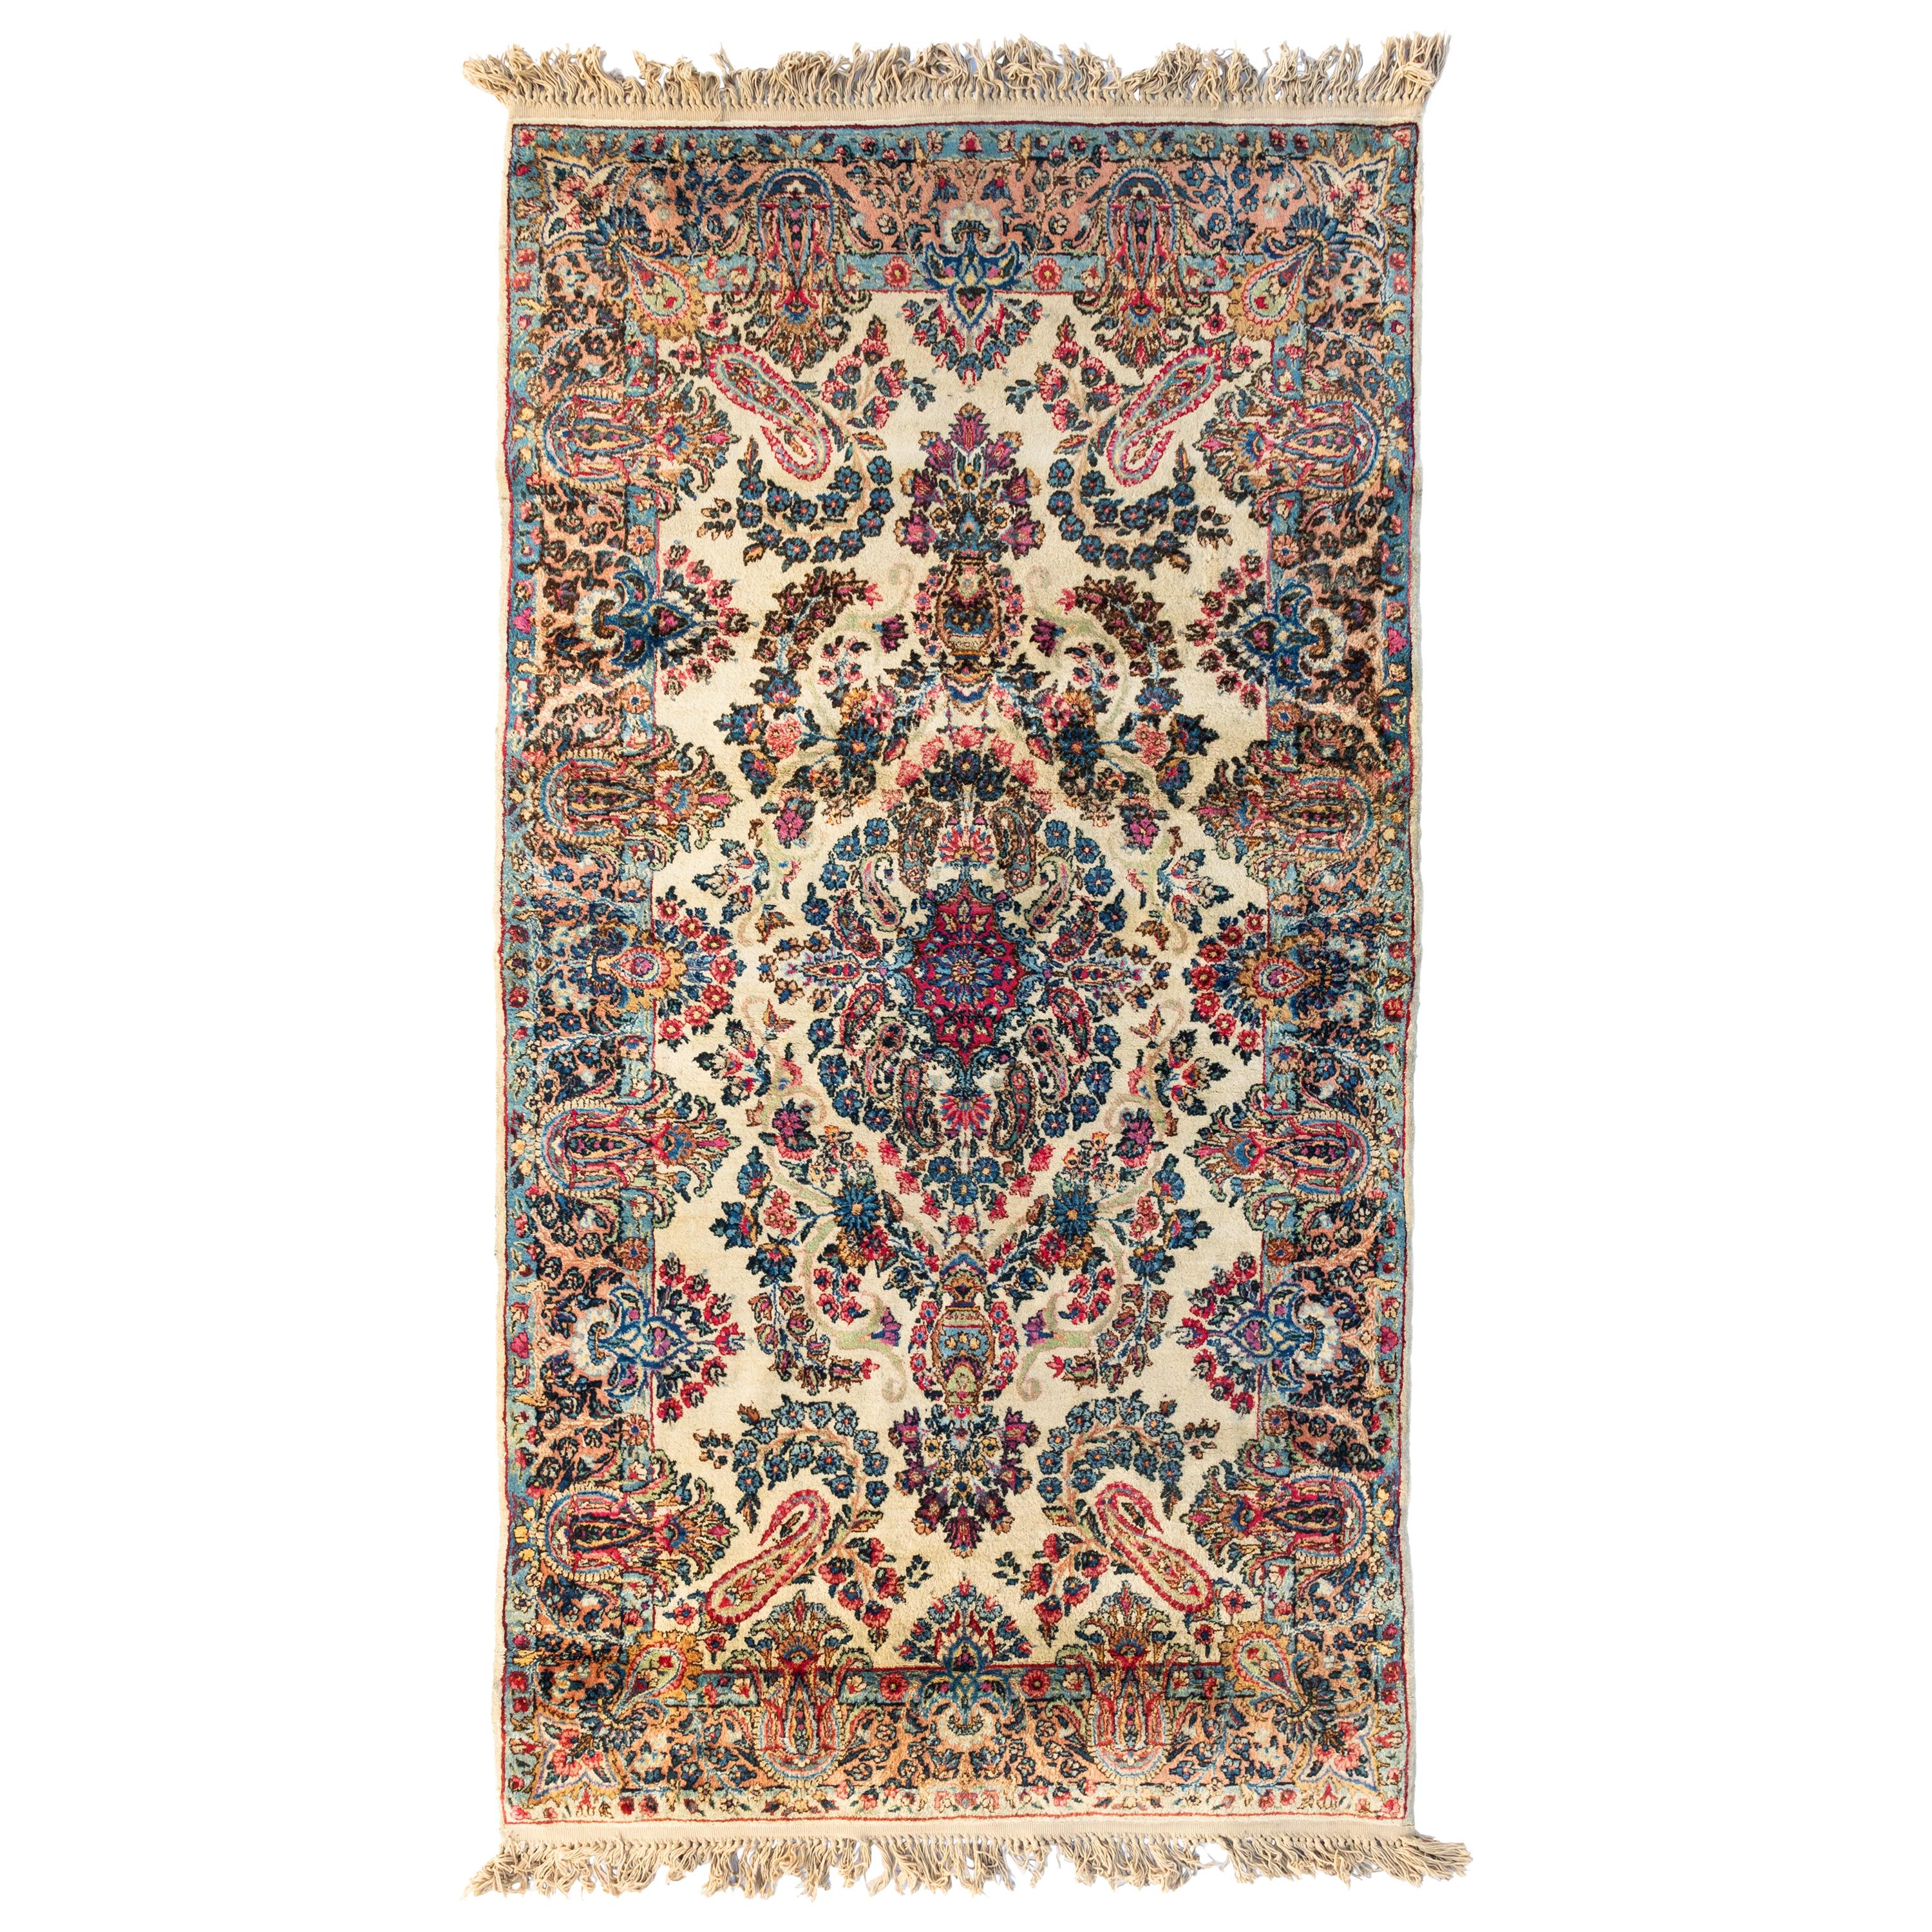 Antique Vintage Persian Ivory Floral Kirman Small Rug, c. 1930s For Sale